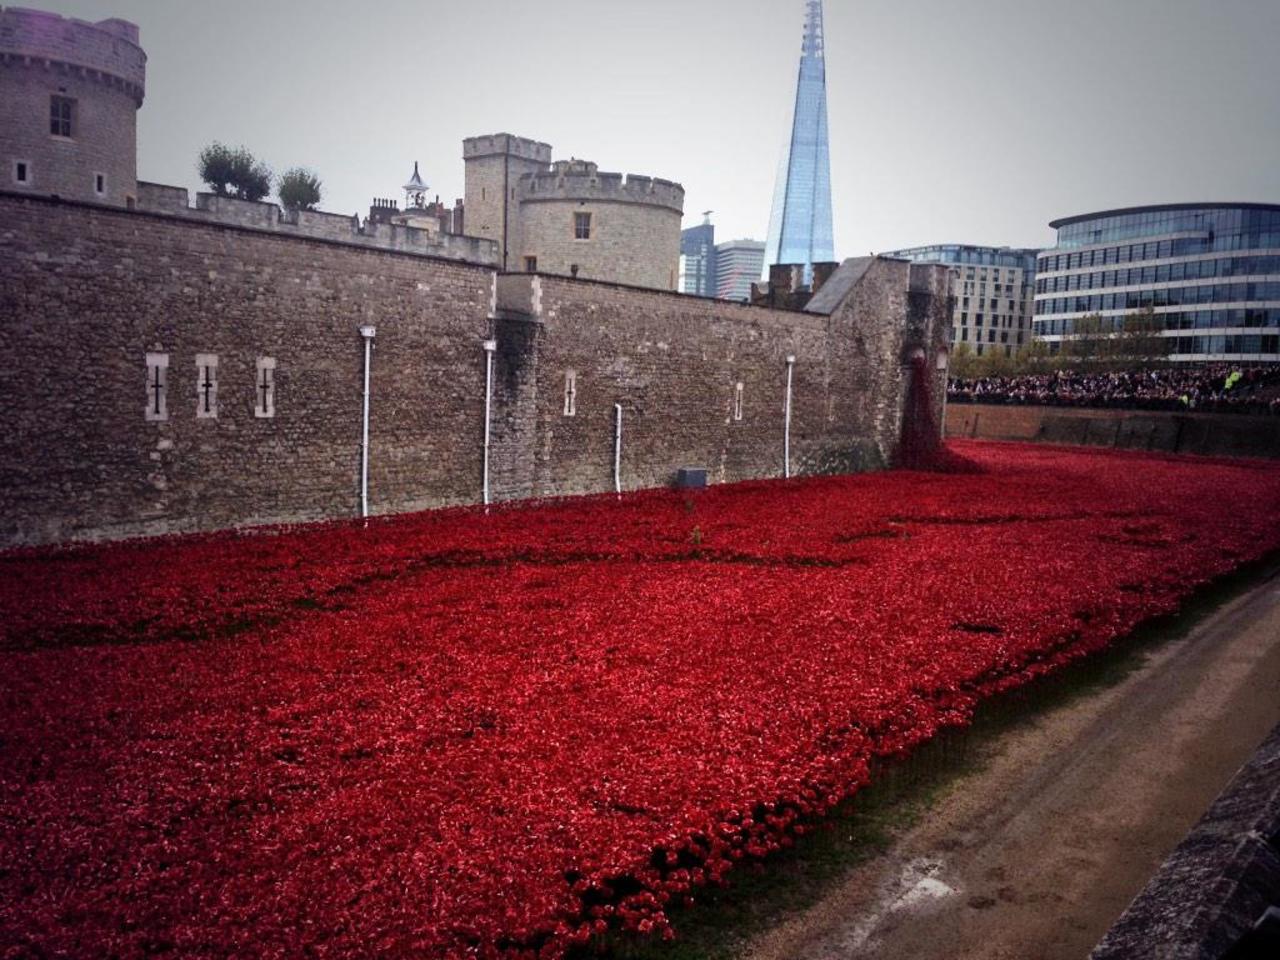 Incredibly powerful art installation at The Tower of London! #TowerPoppies #PoppyAppeal #Poppies #seaofpoppies #art http://t.co/c5DgcayQnN